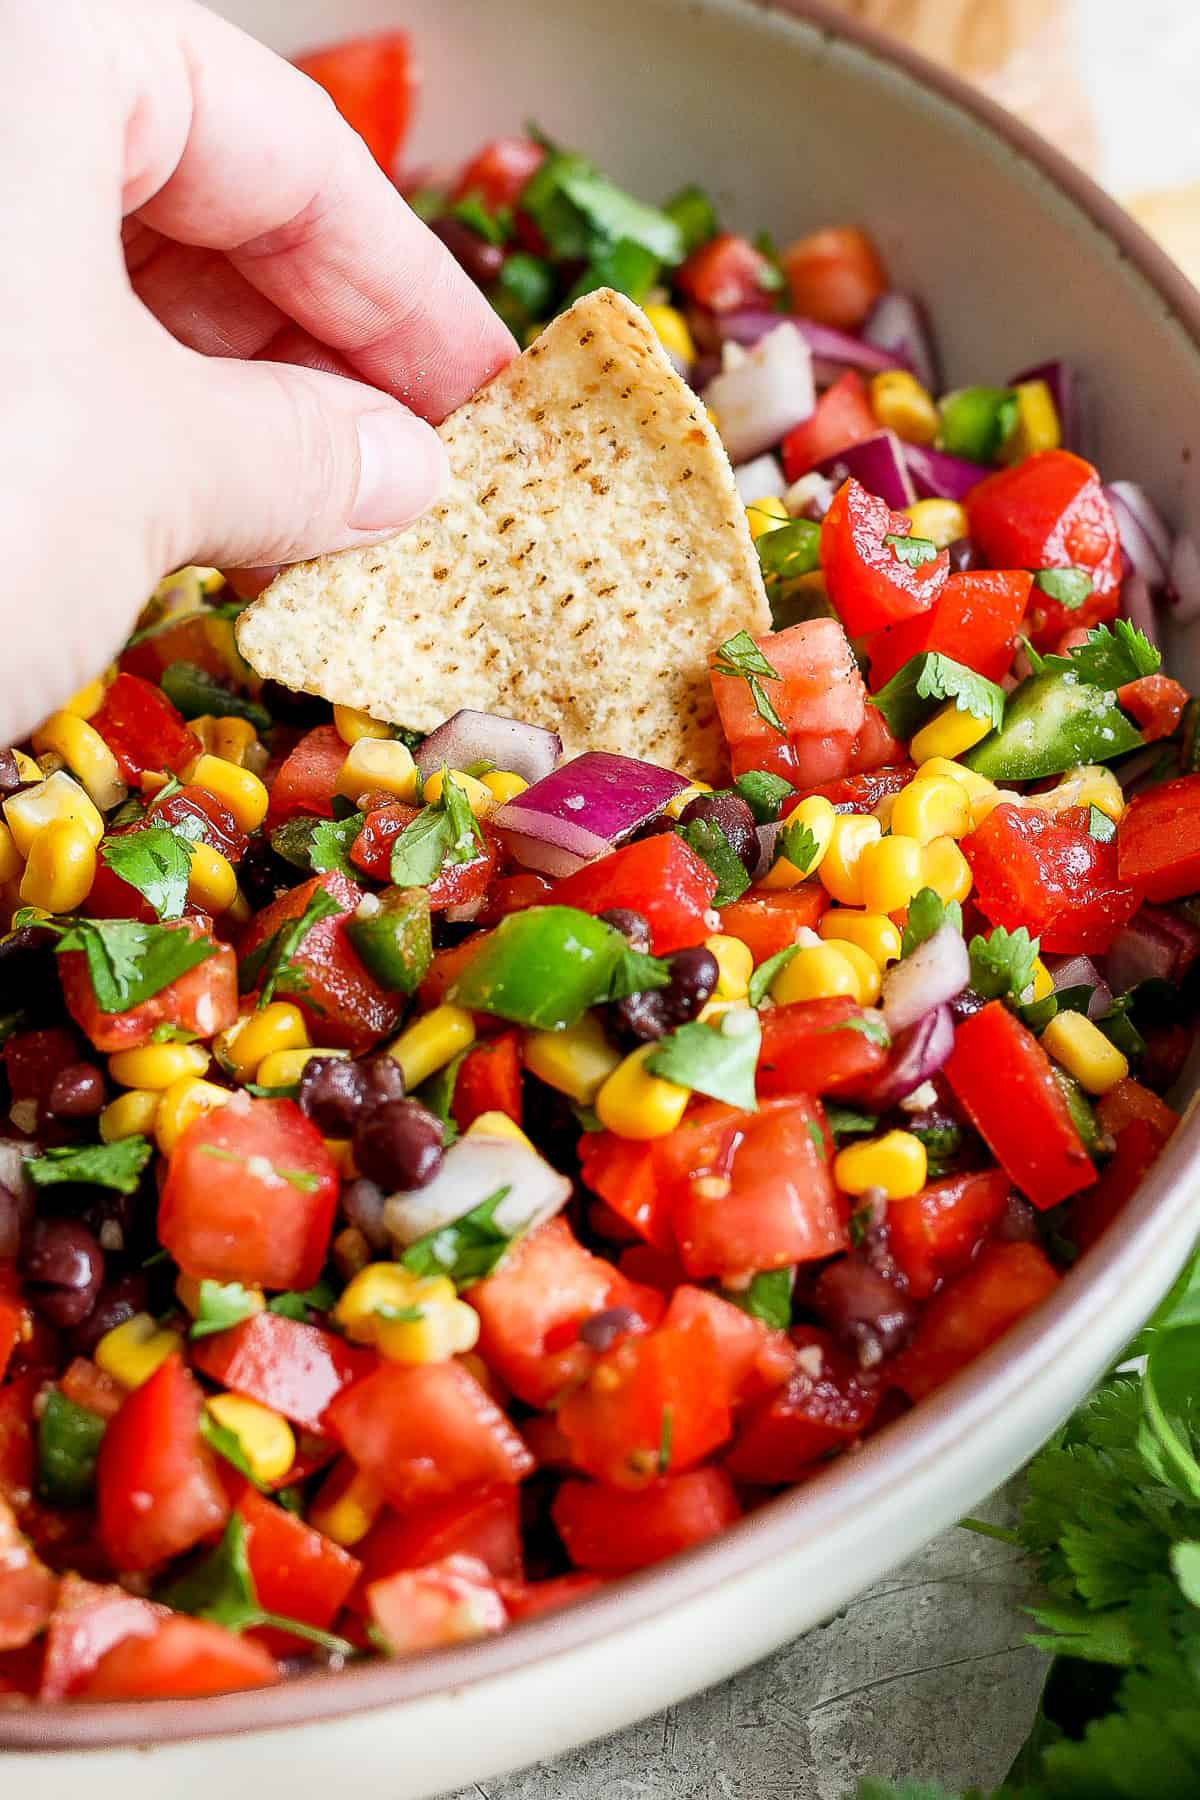 A tortilla chip being dipped into a bowl of black bean and corn salsa.